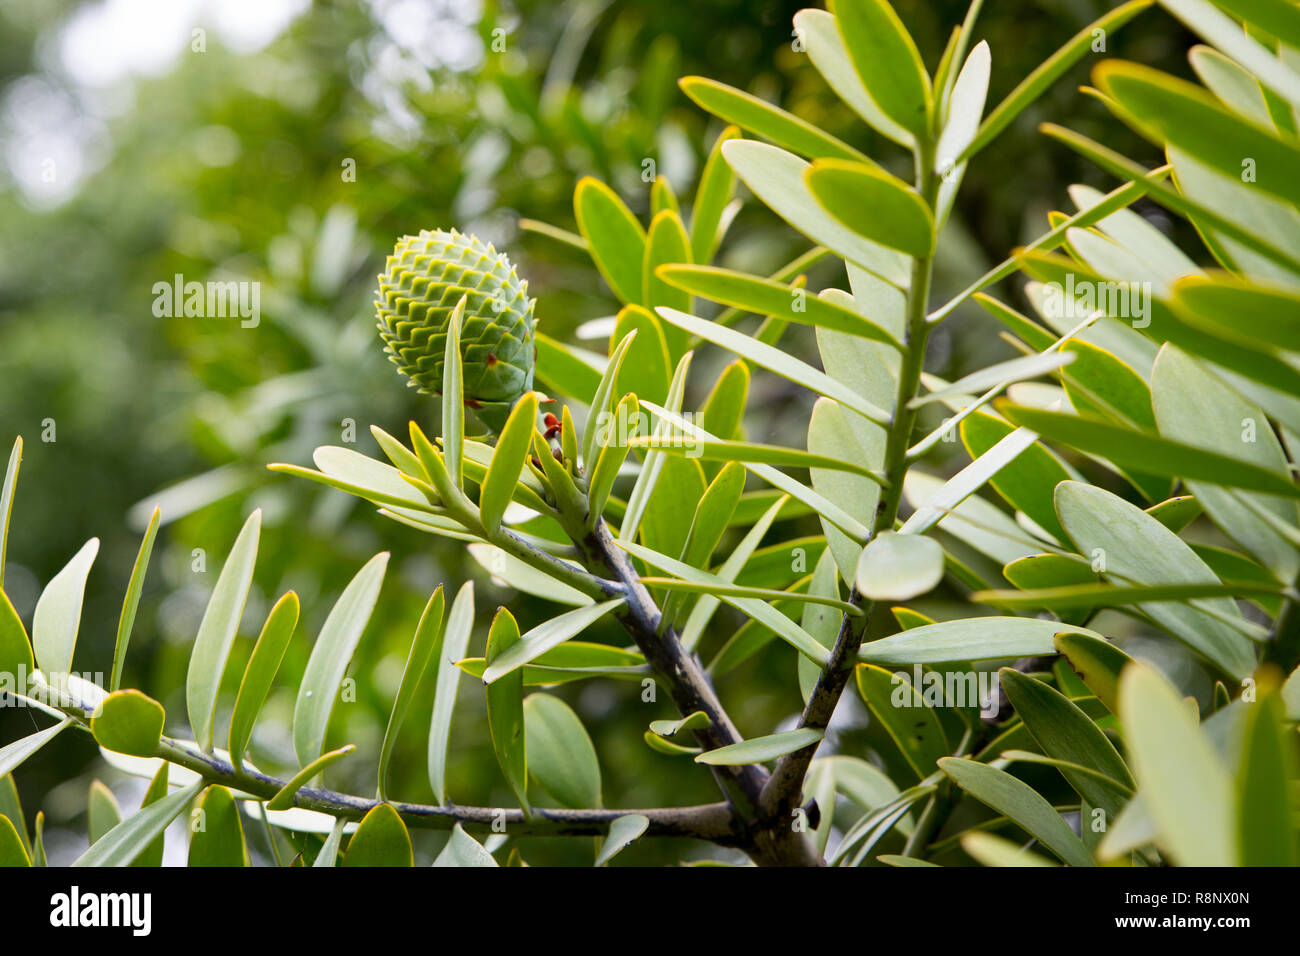 A young kauri tree forms new cones in the springtime in New Zealand Stock Photo